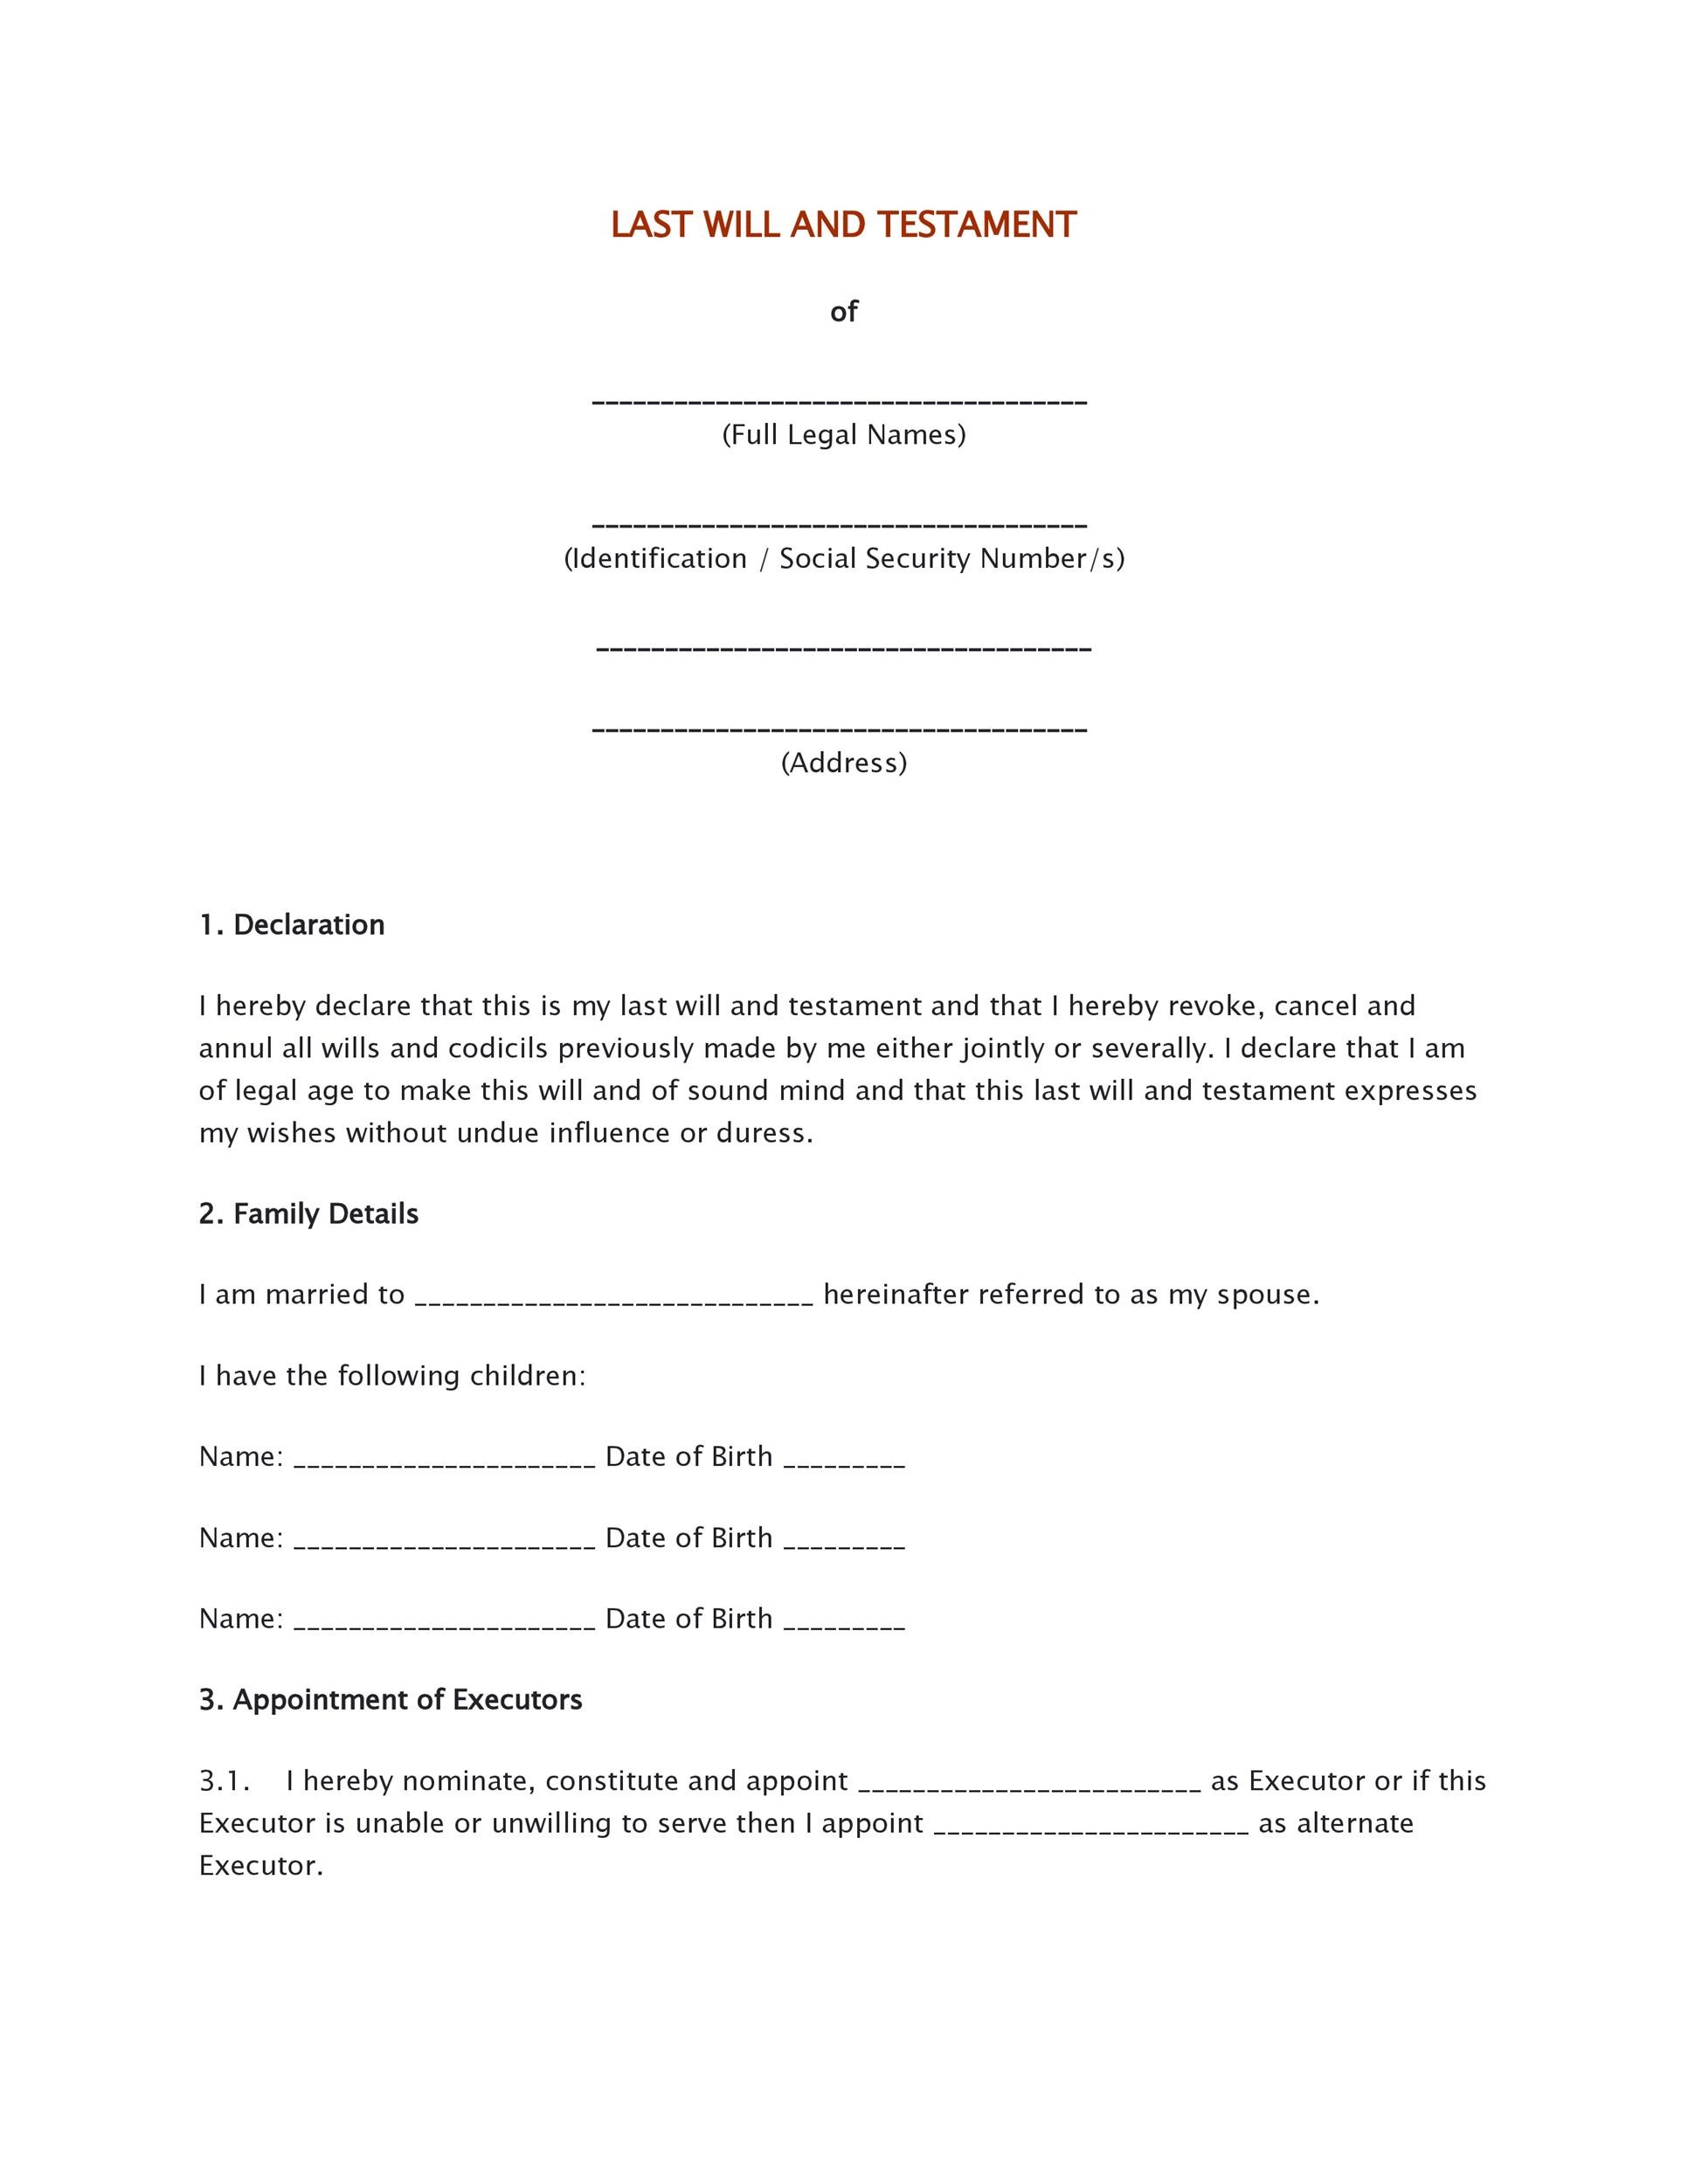 last-will-and-testament-forms-free-printable-32-last-will-templates-free-printable-there